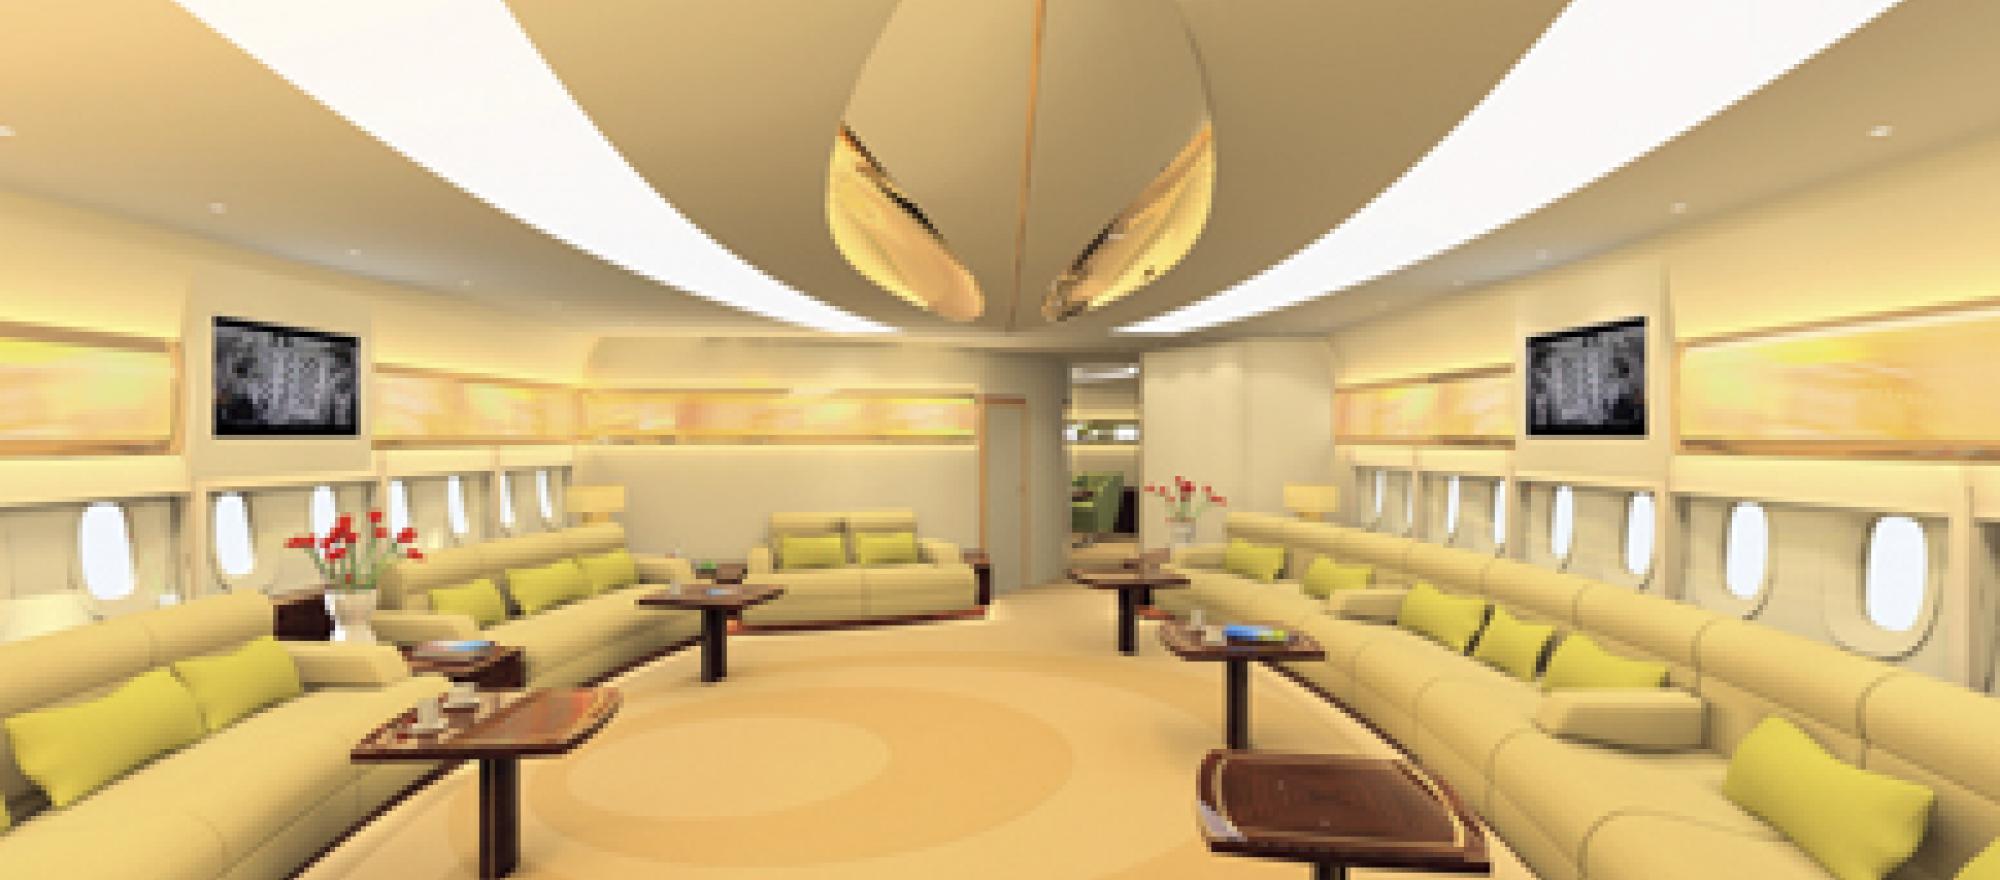 You won’t confuse the prince’s airbus a380 cabin with airline coach class. It